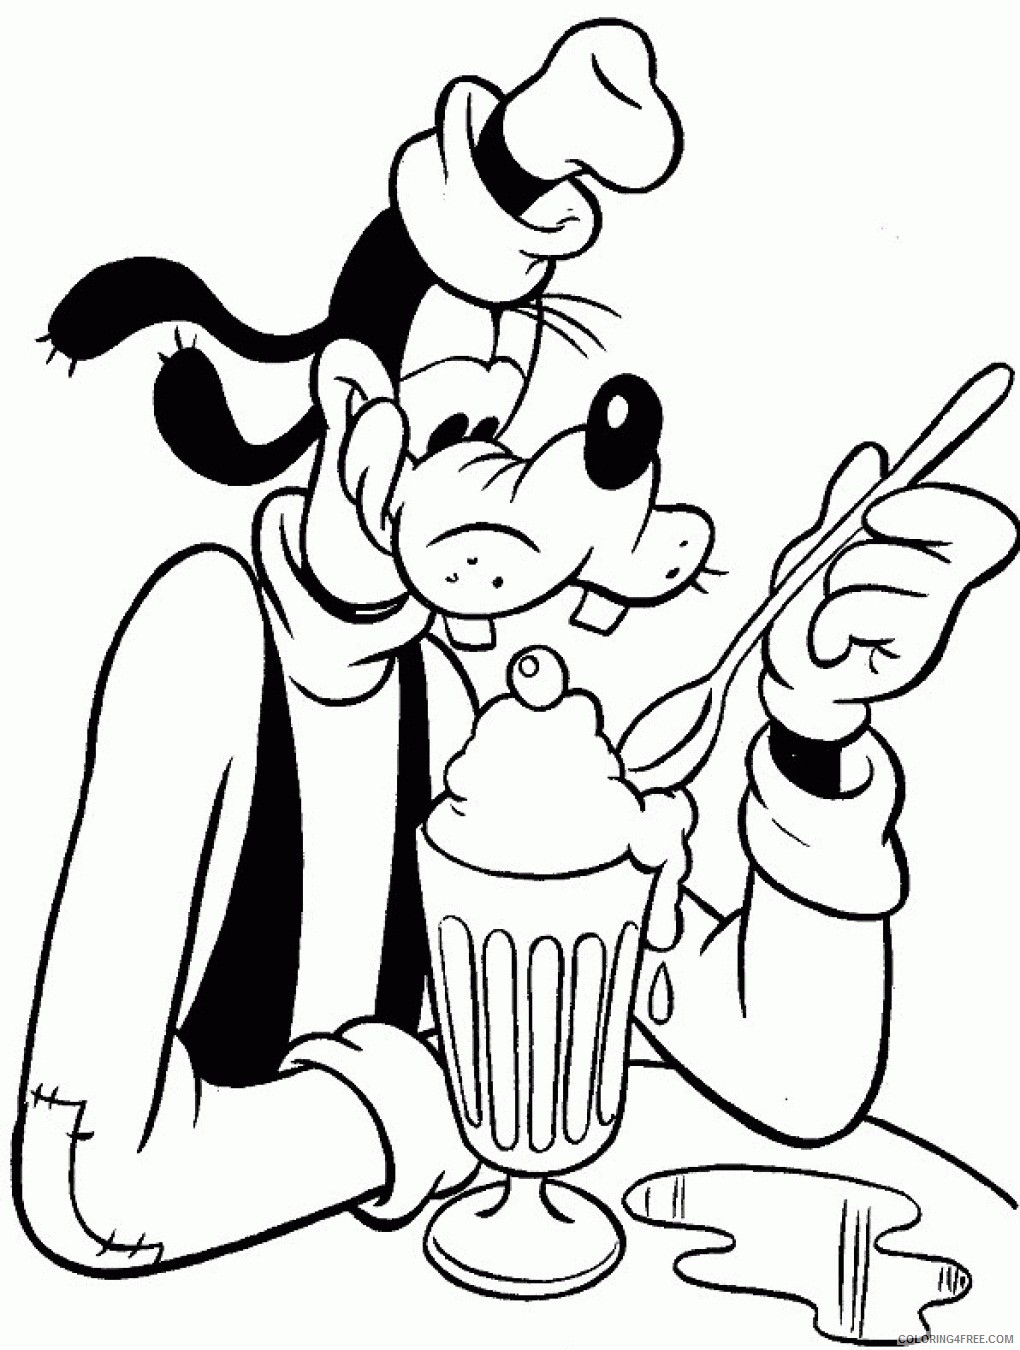 Goofy Coloring Pages Cartoons Goofy to Print Free Printable 2020 3036 Coloring4free